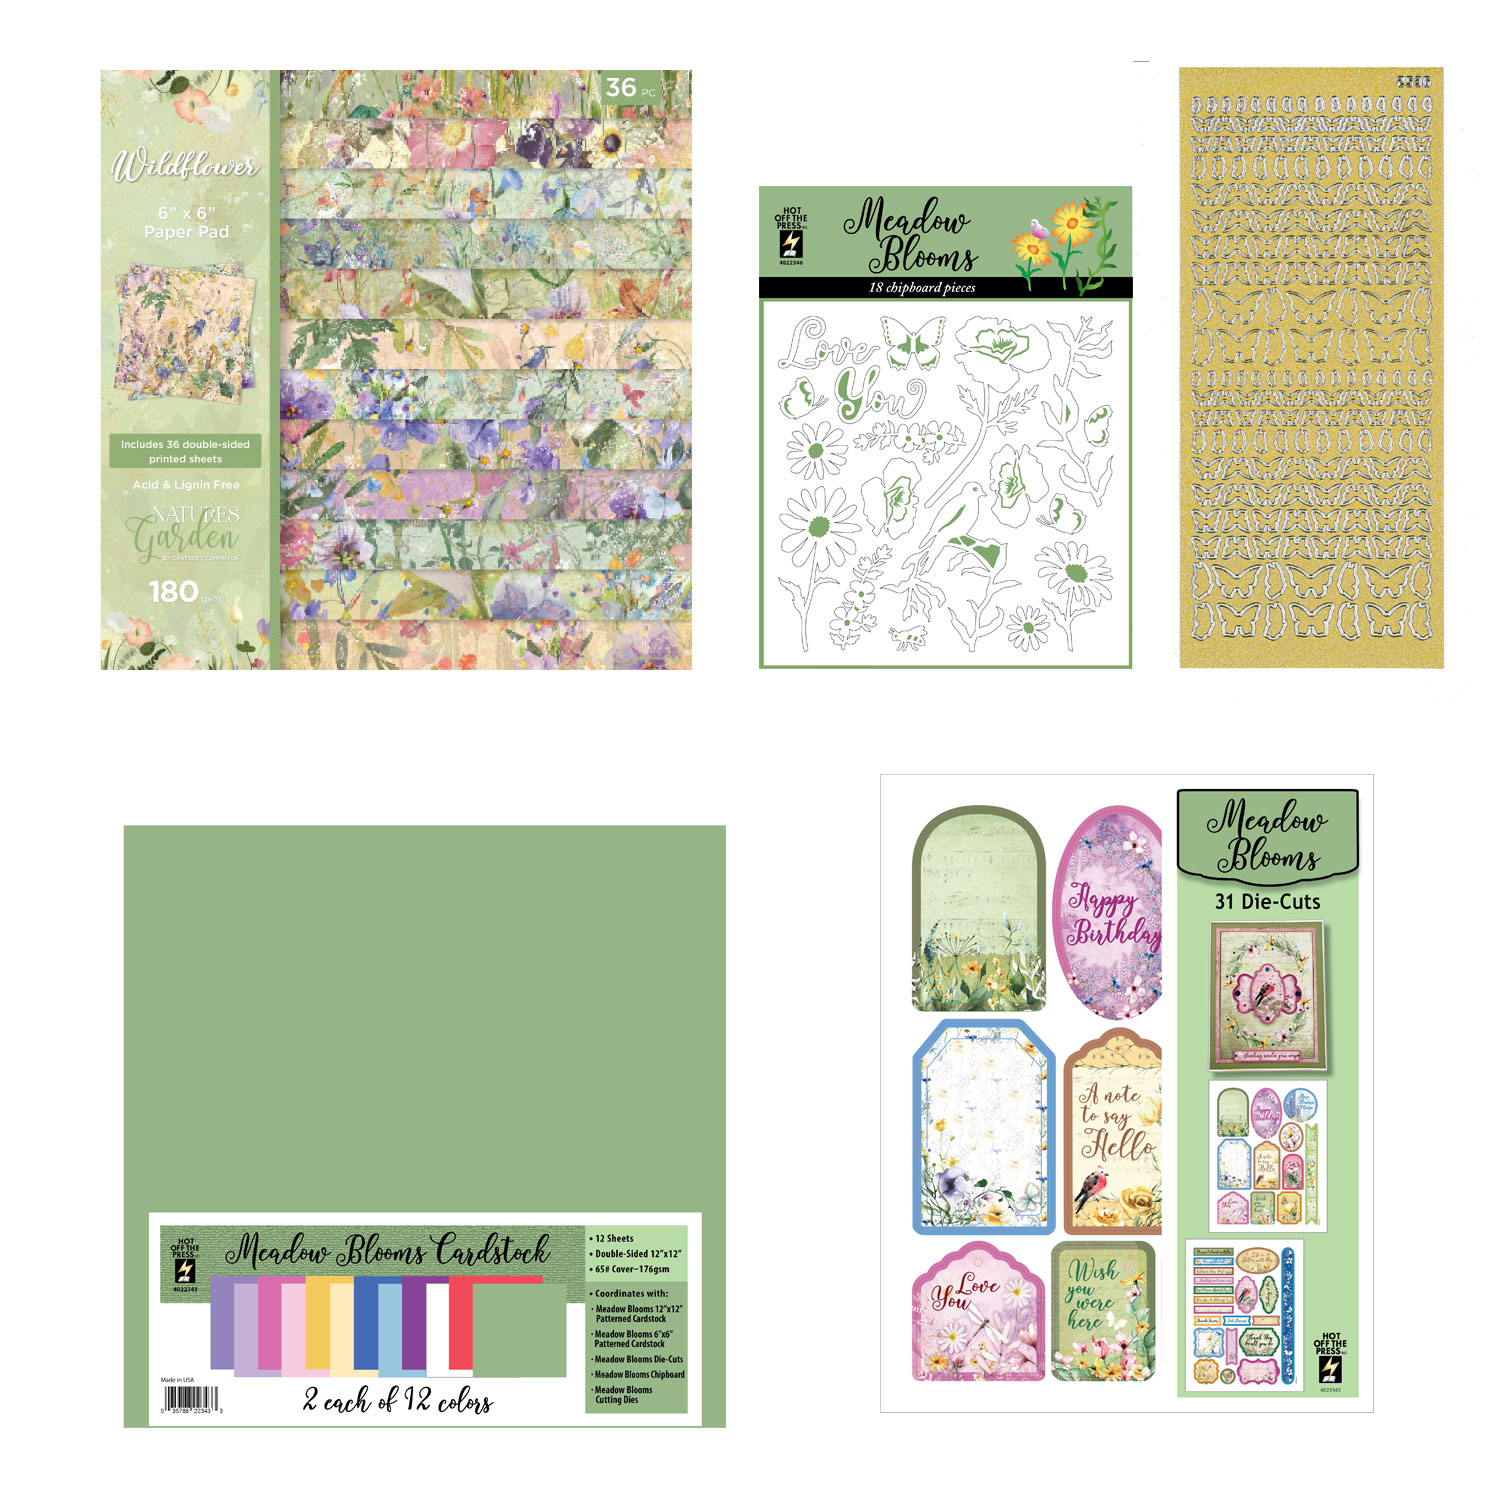 Wildflowers by Crafter's Companion Money Saver